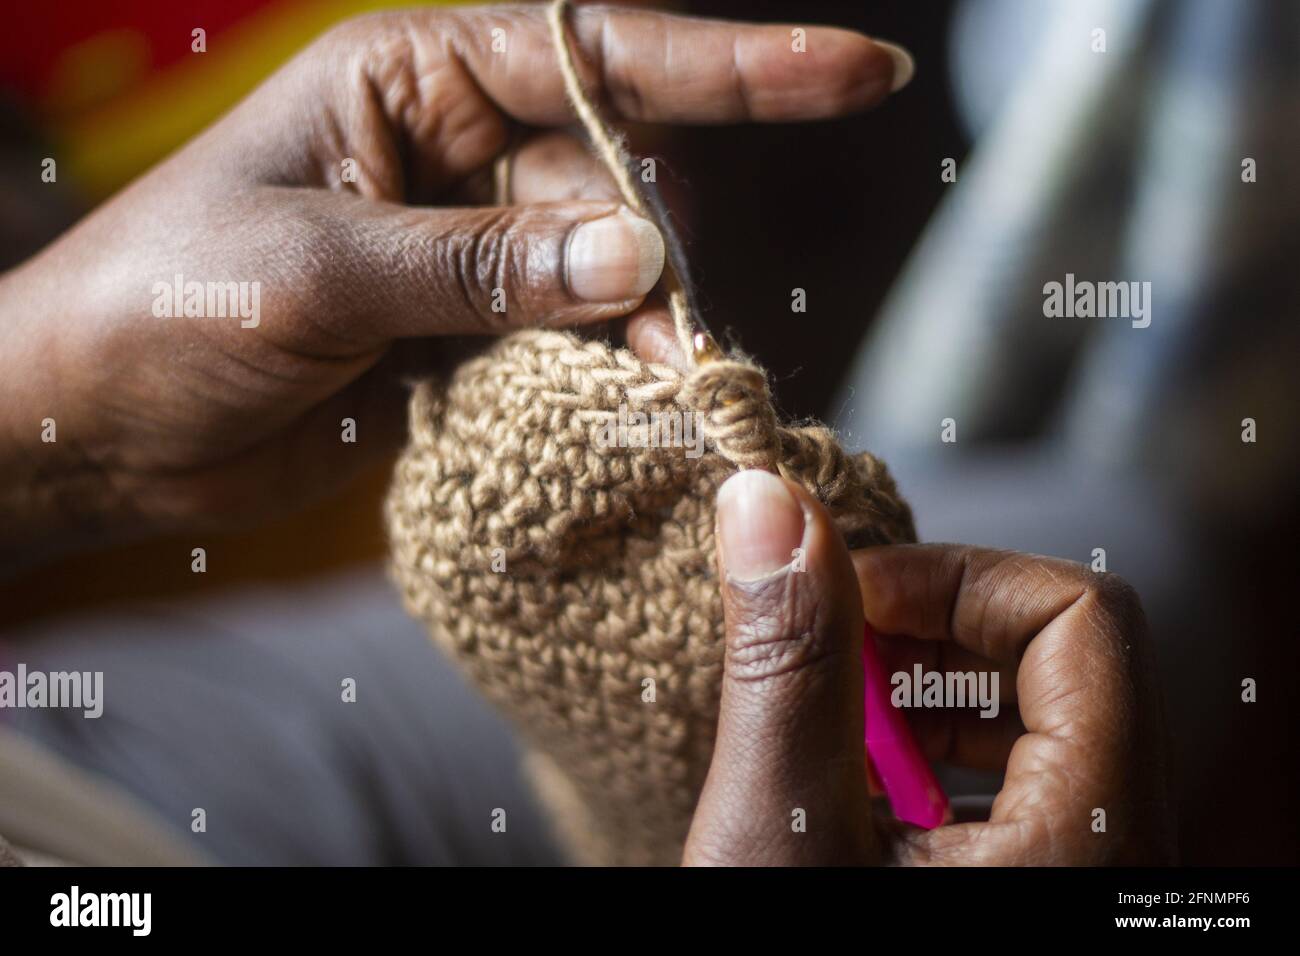 Close up of a woman's hand crocheting Stock Photo